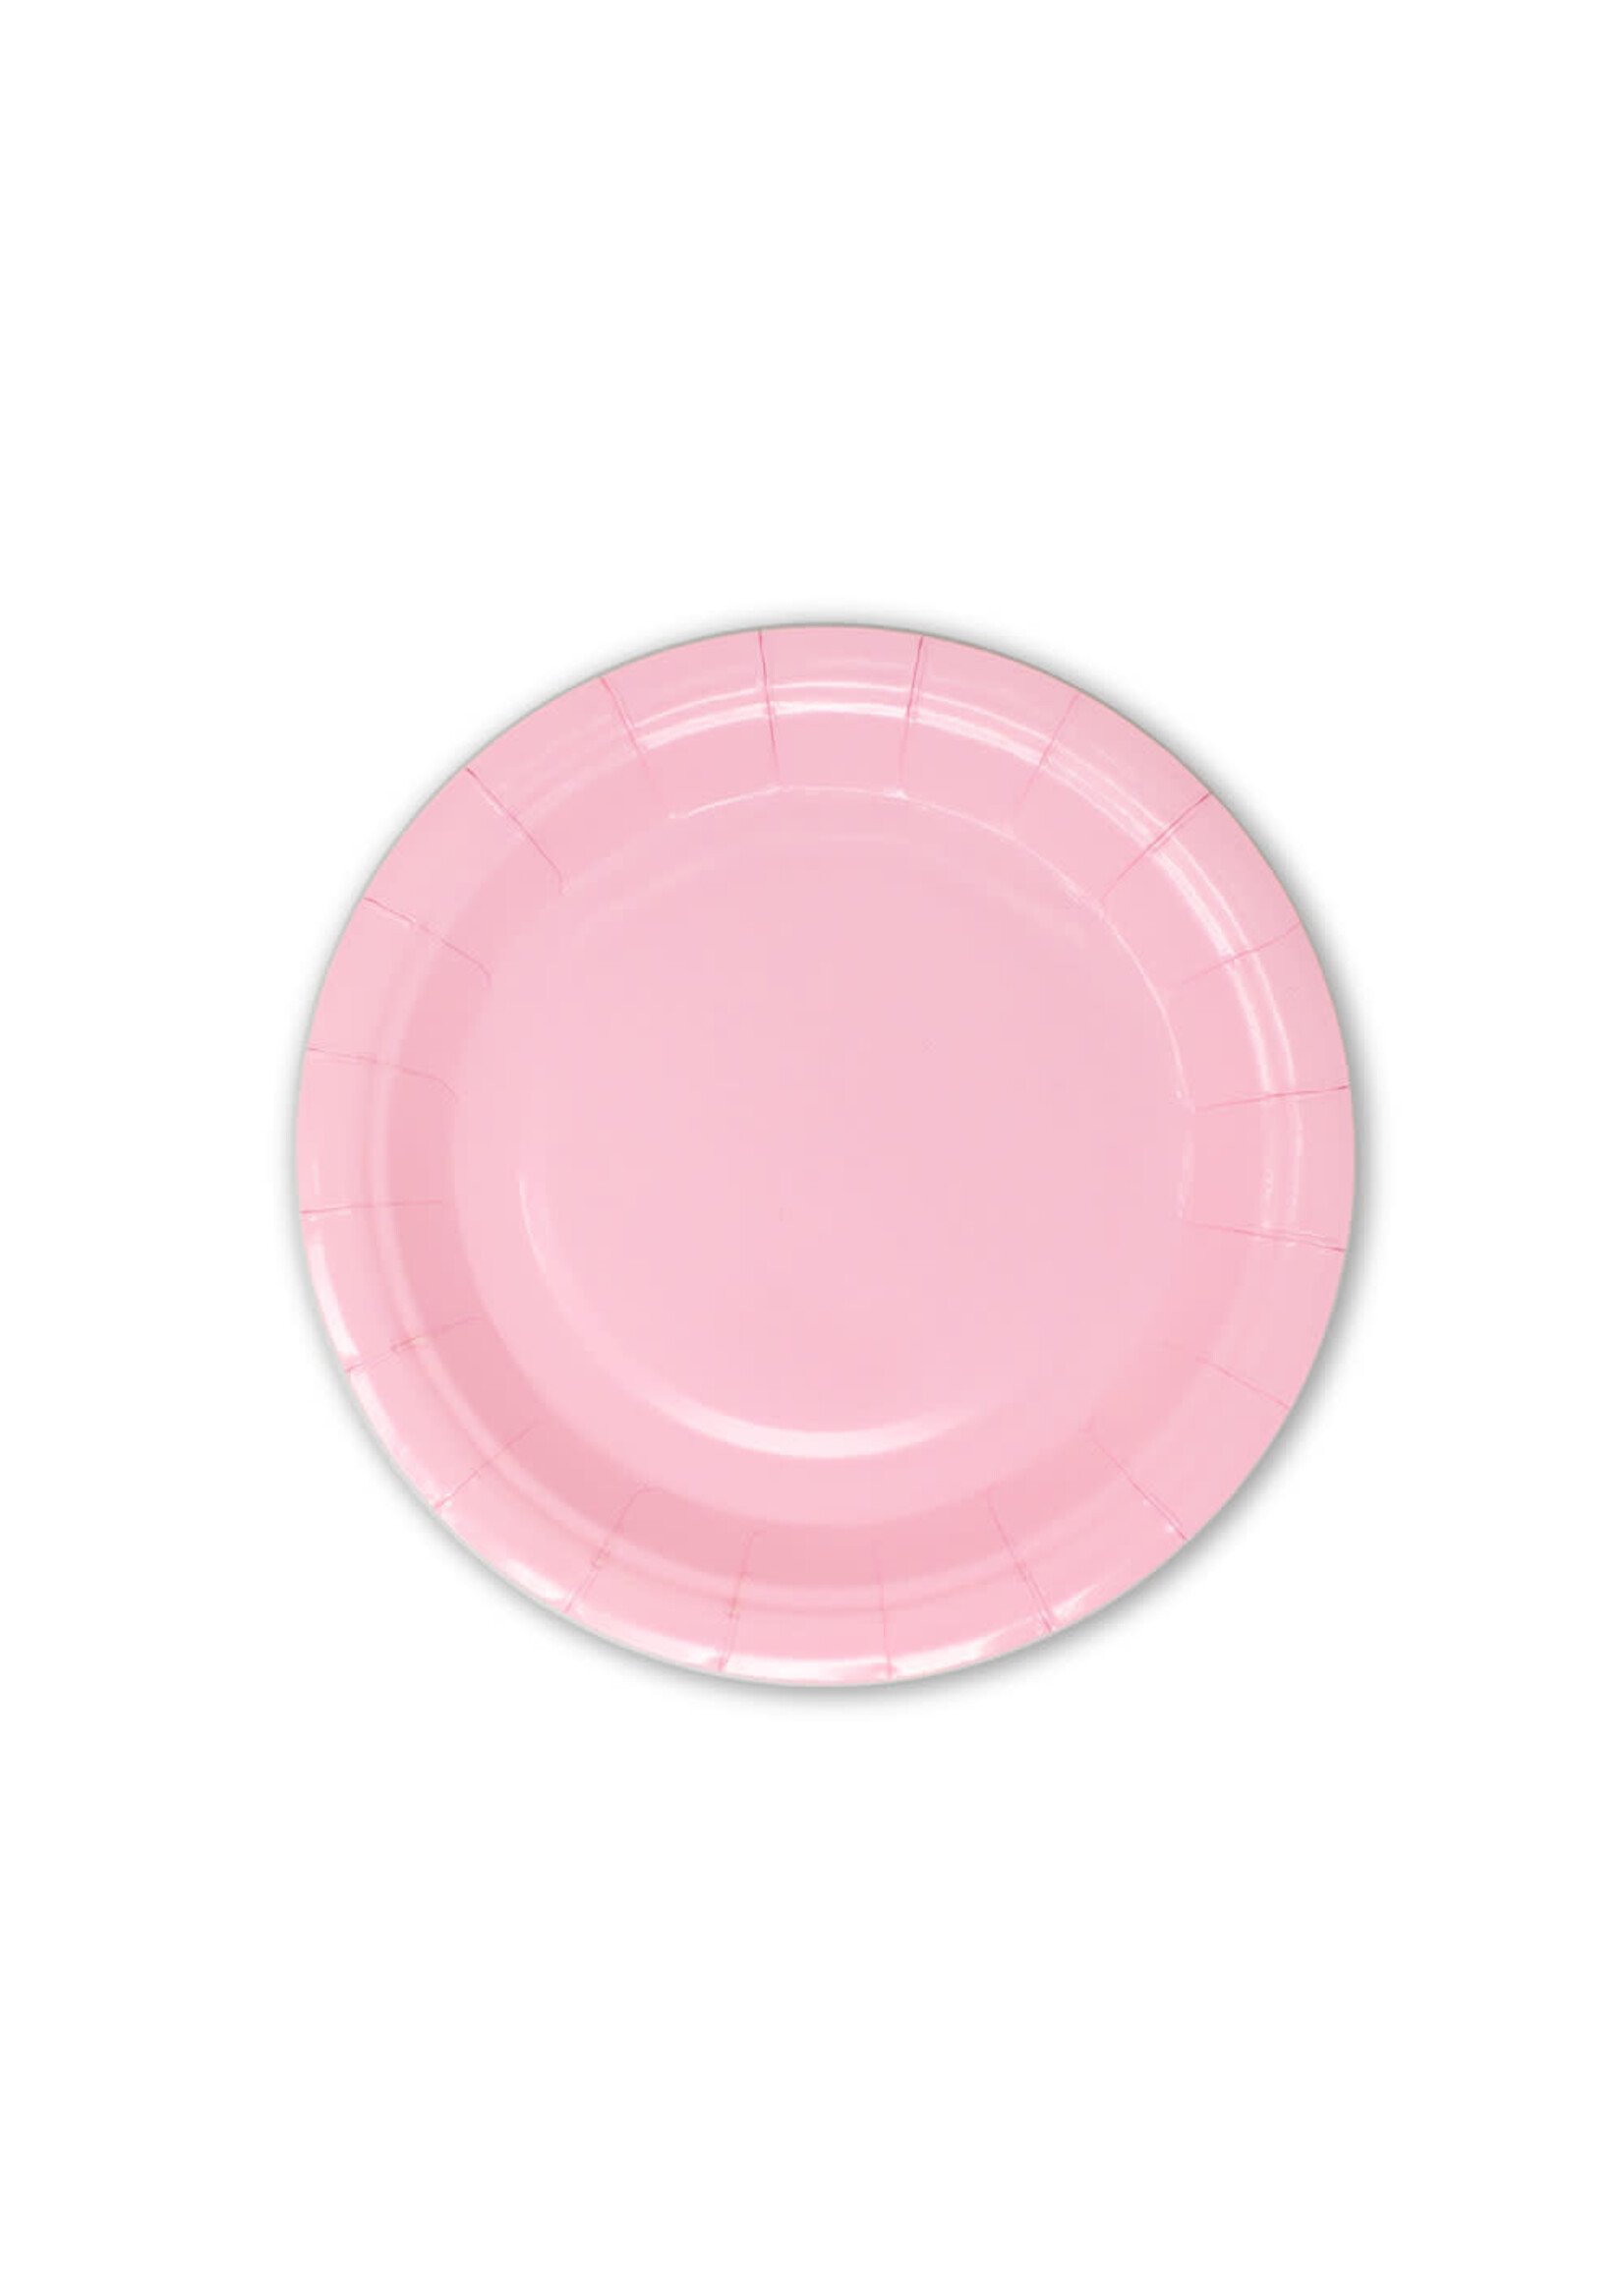 7IN PAPER PLATE 20CT PINK